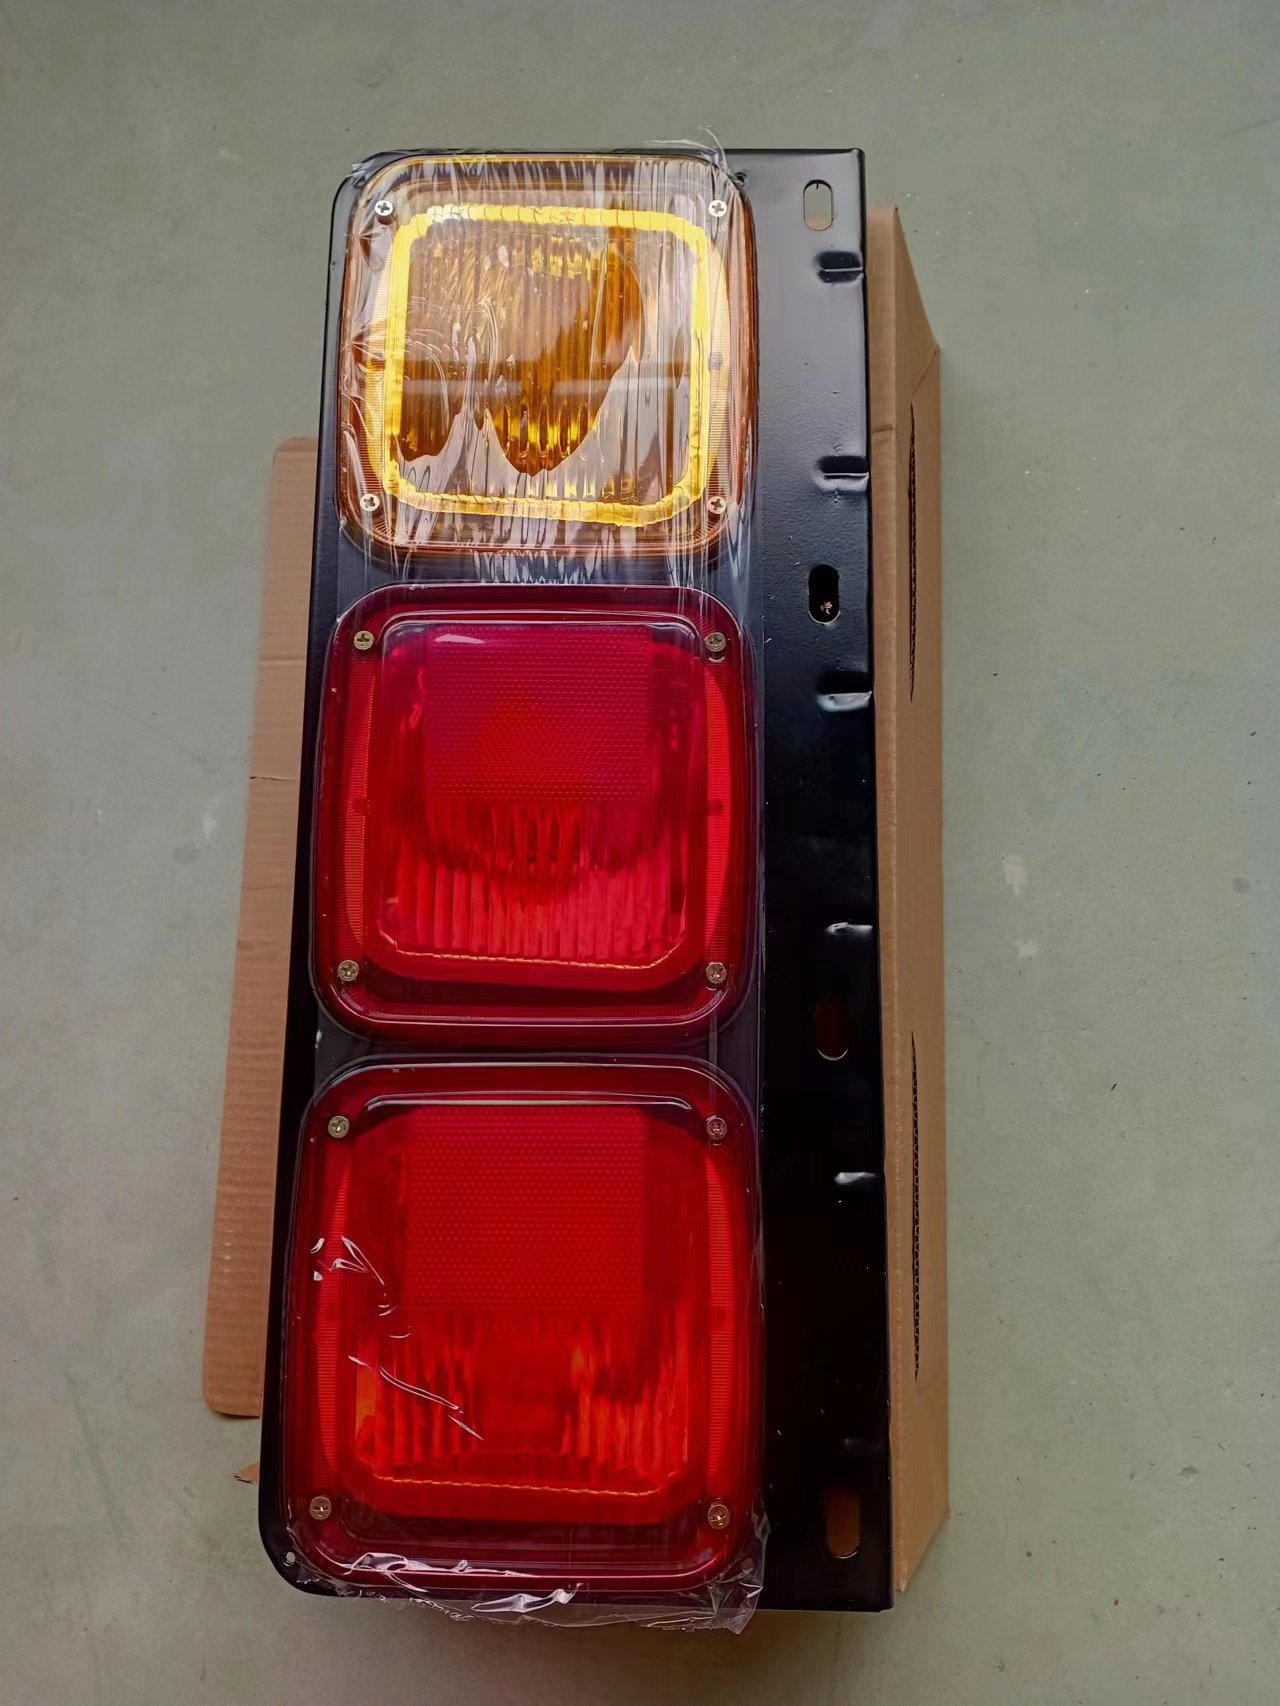 HINO 700 TRUCK SERIES REAR LIGHT TAIL LAMP WITH IRON